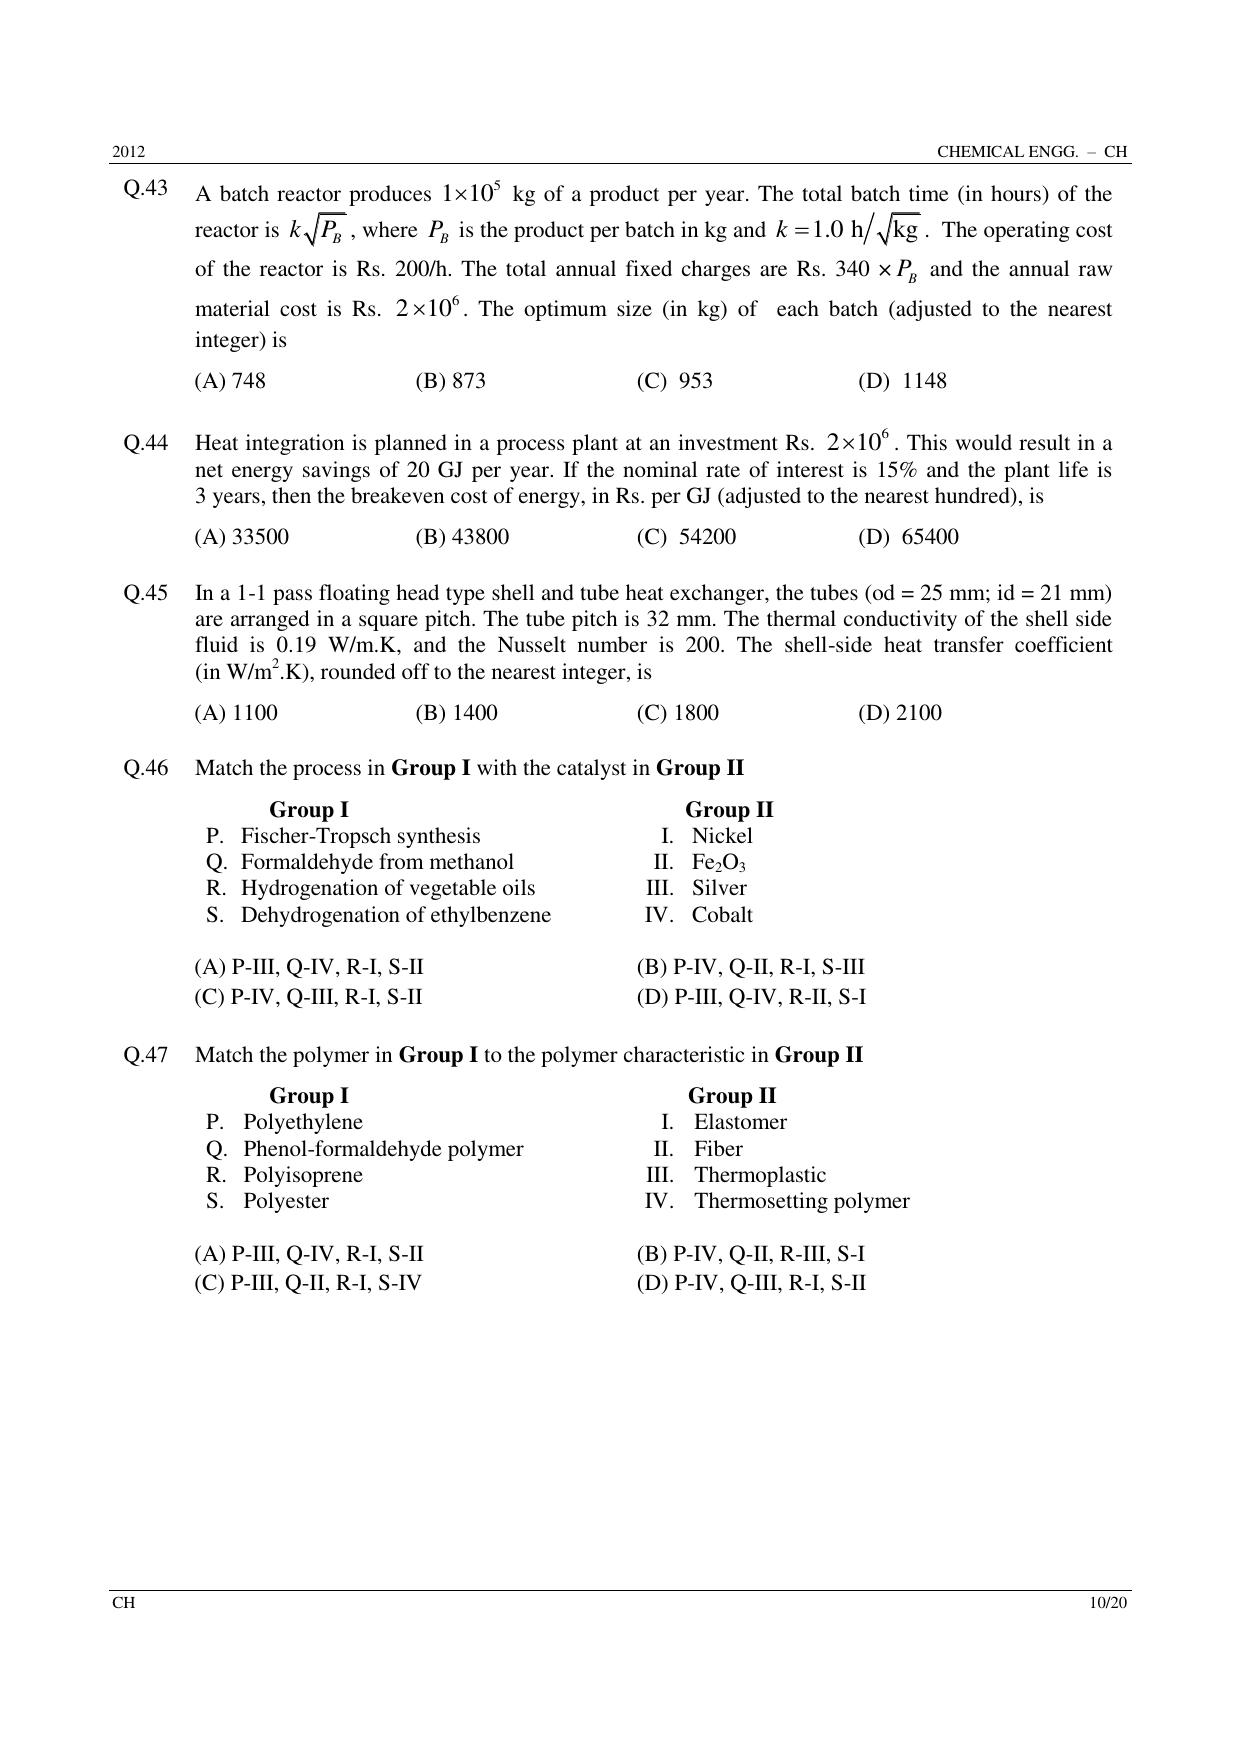 GATE 2012 Chemical Engineering (CH) Question Paper with Answer Key - Page 10